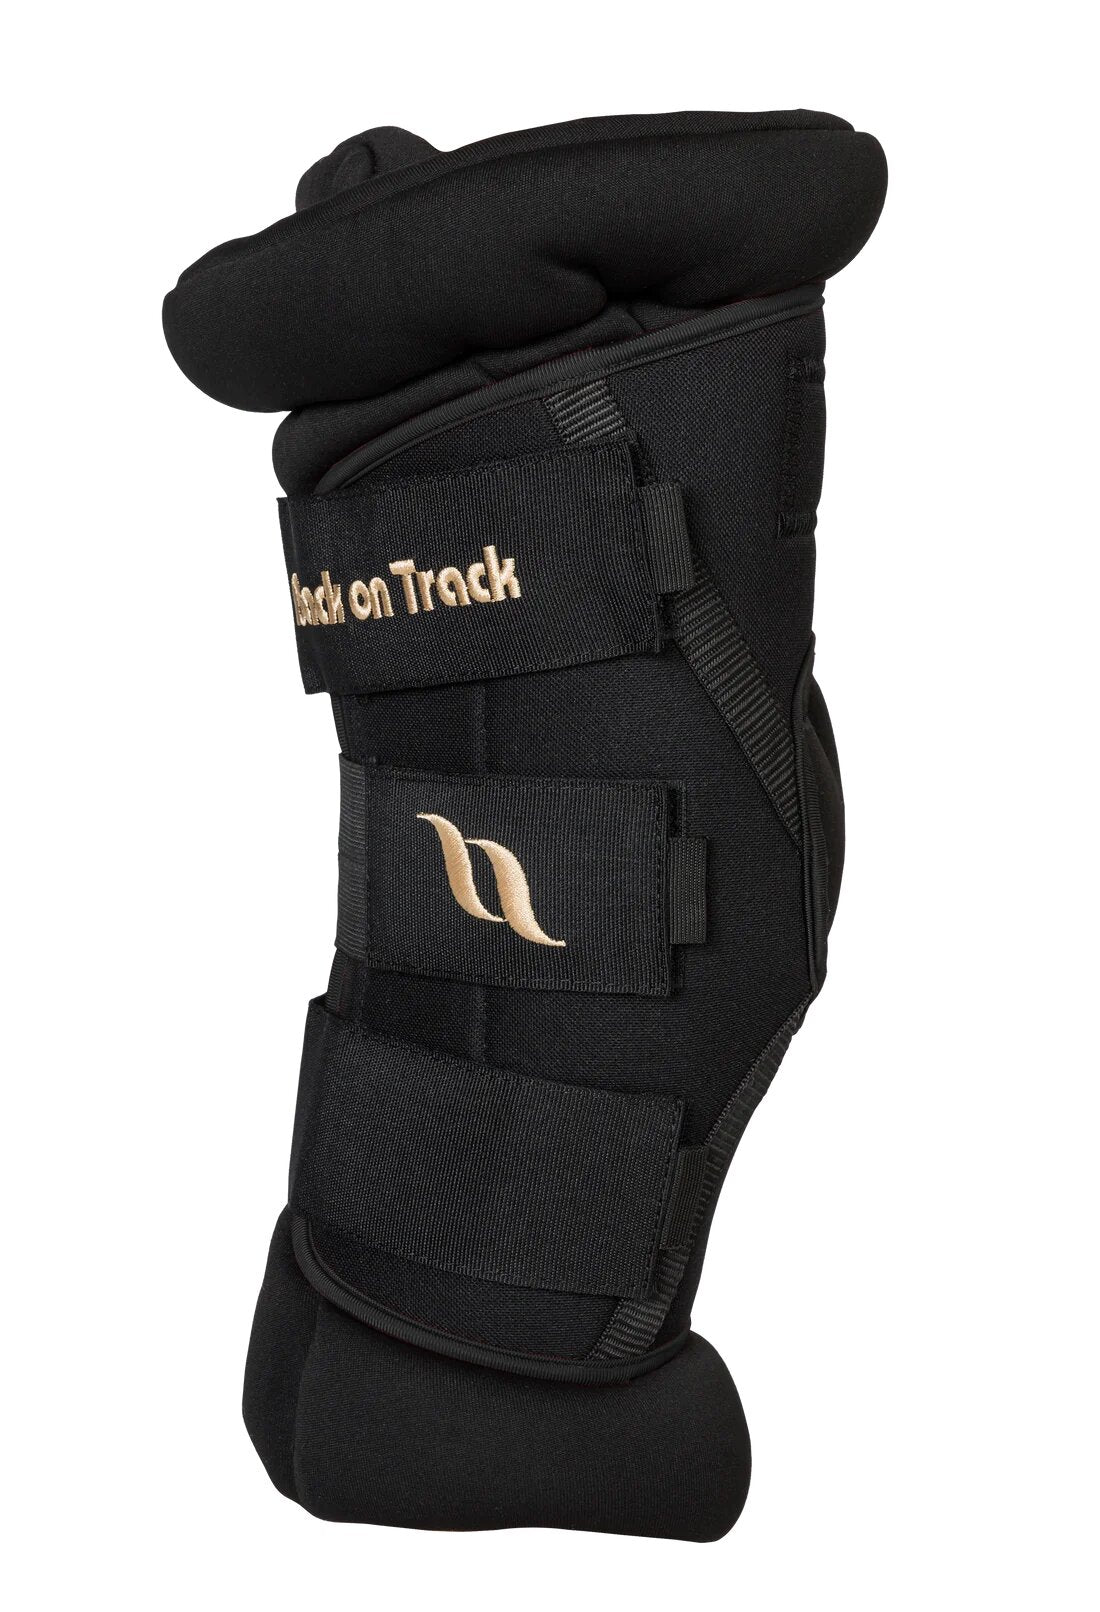 Back on Track Royal Padded Hock Boots Deluxe